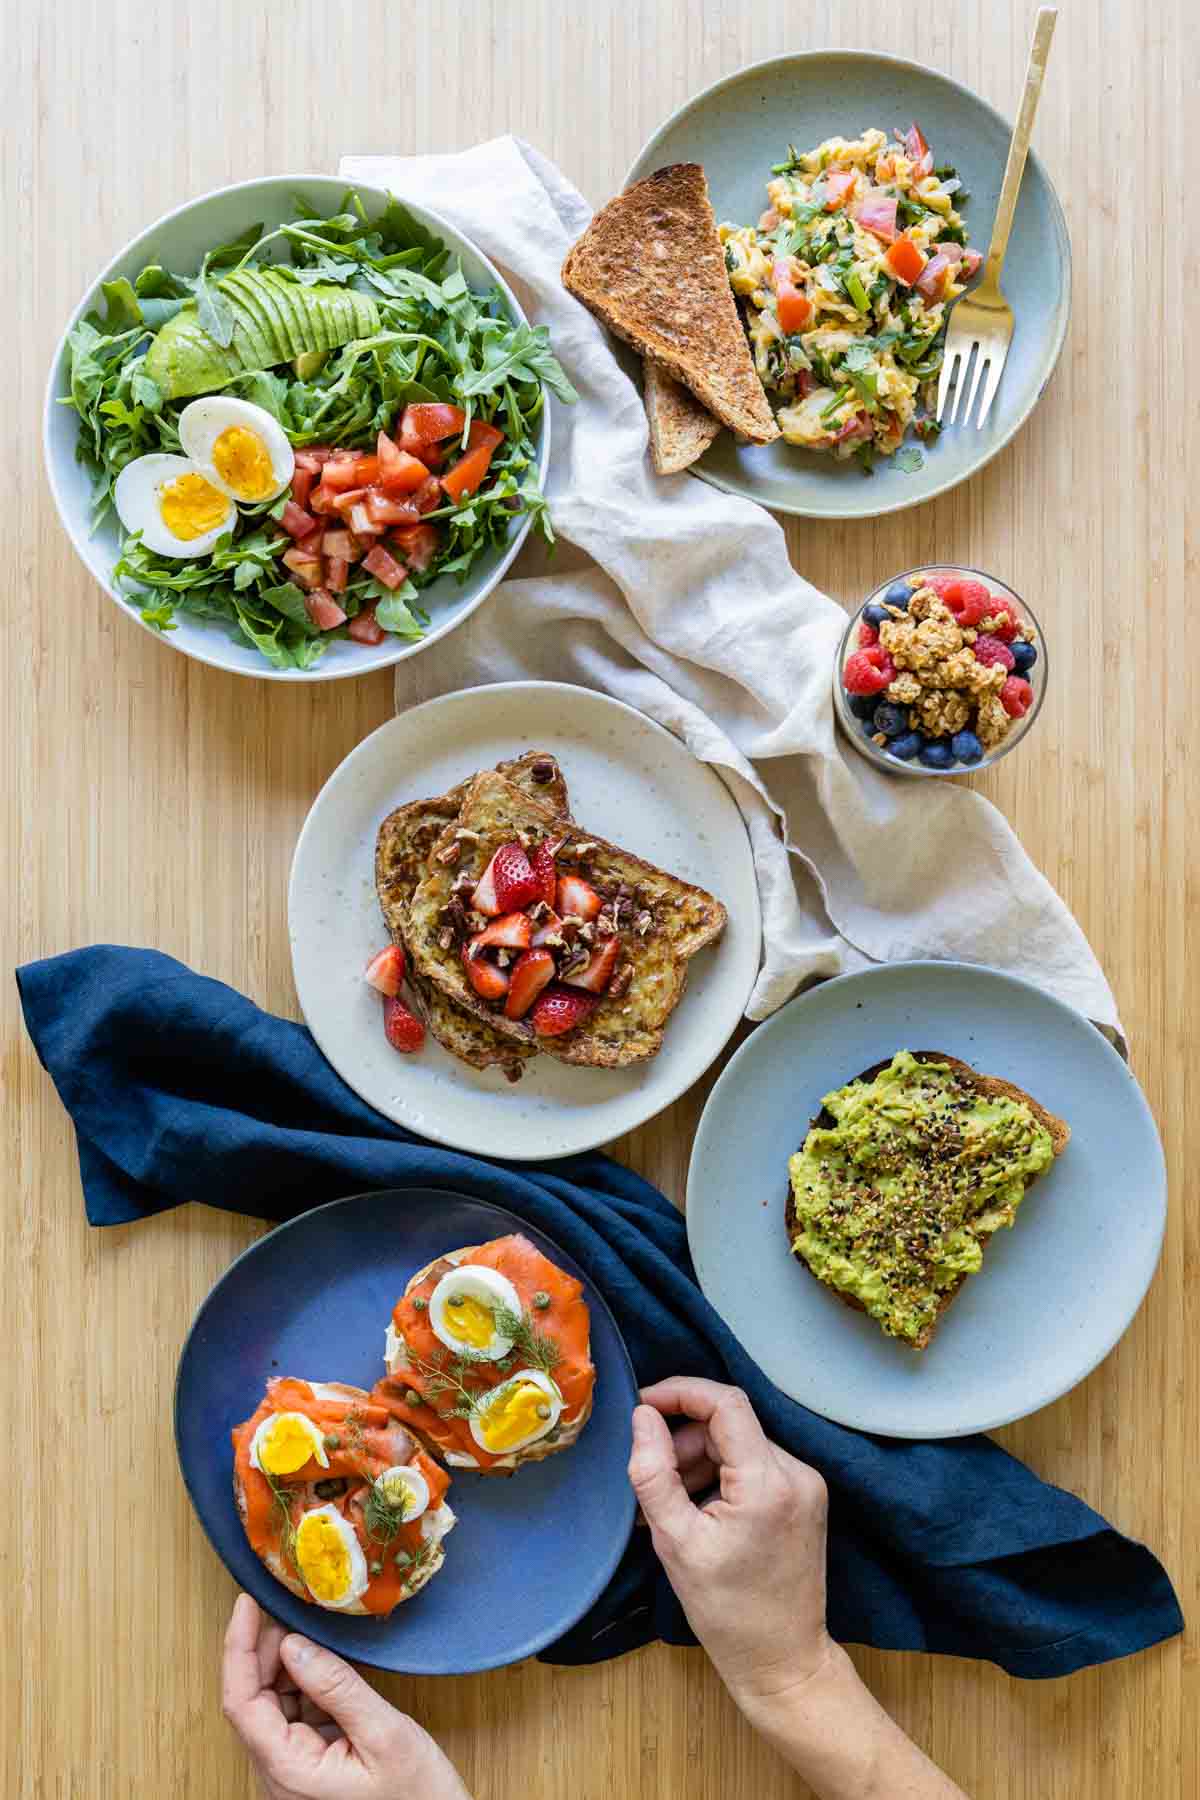 All 6 brunch ideas next to each other on a kitchen counter.